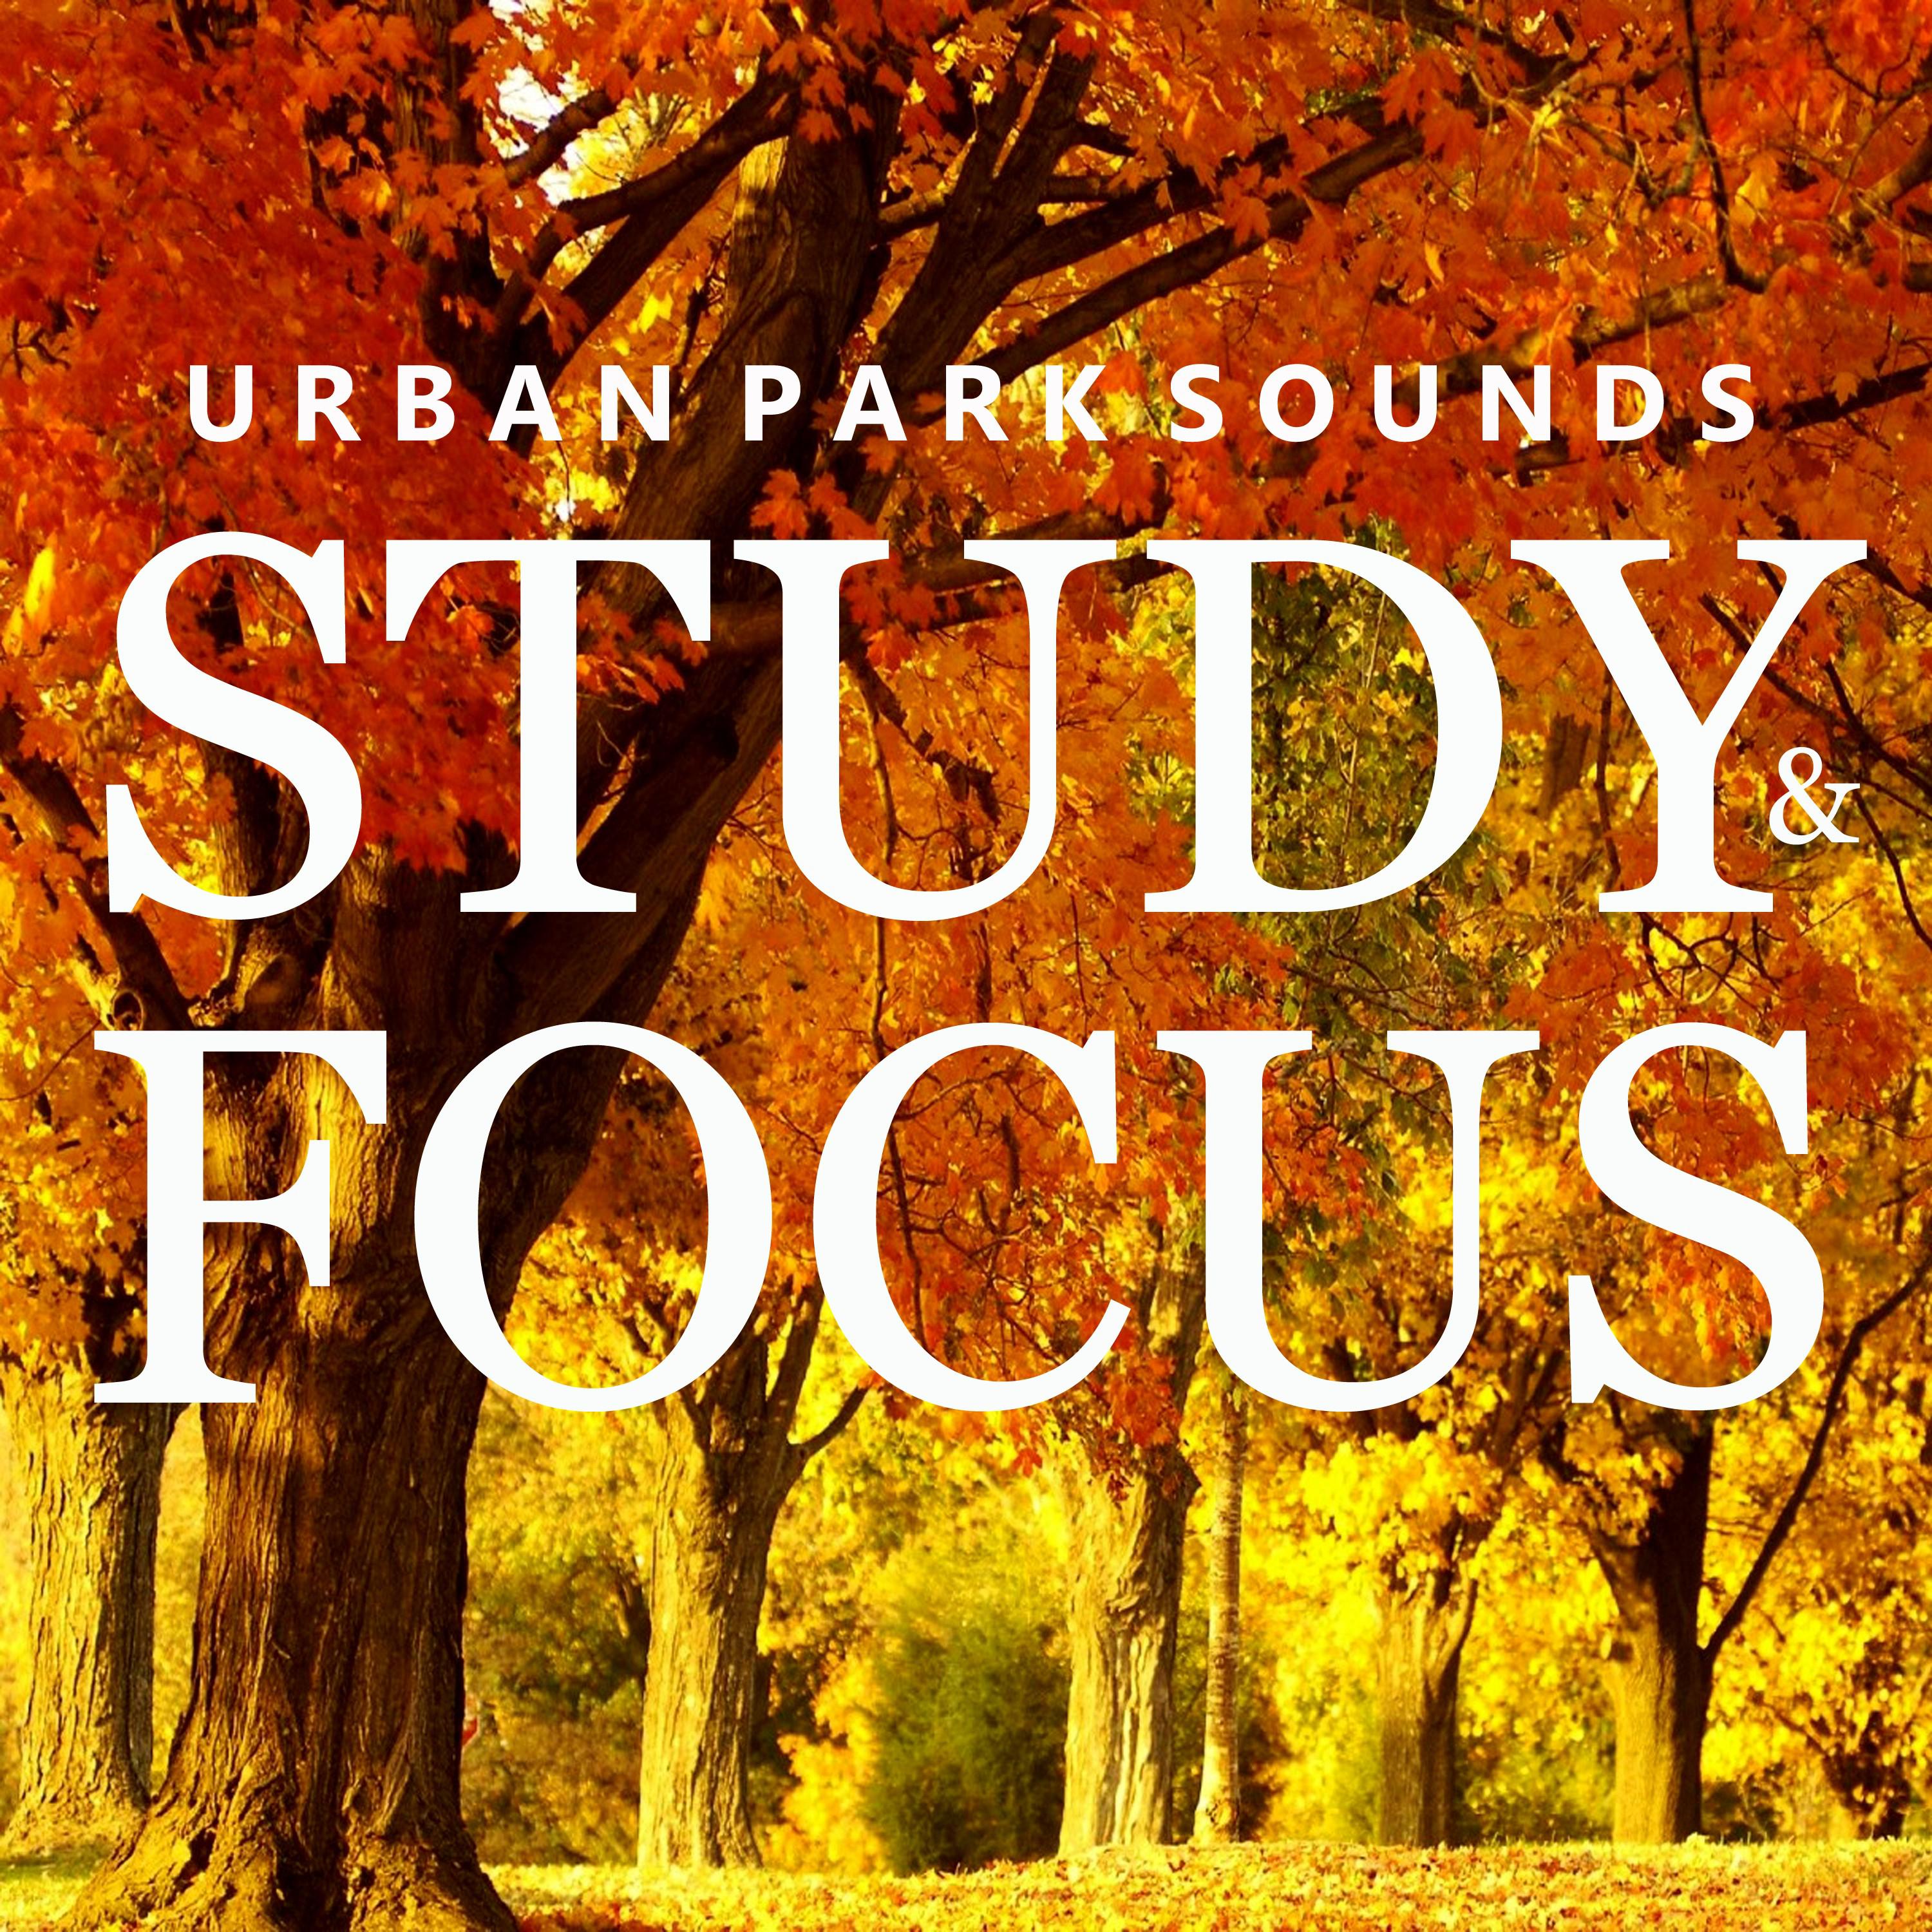 Urban Park Sounds for Studying, Pt. 25